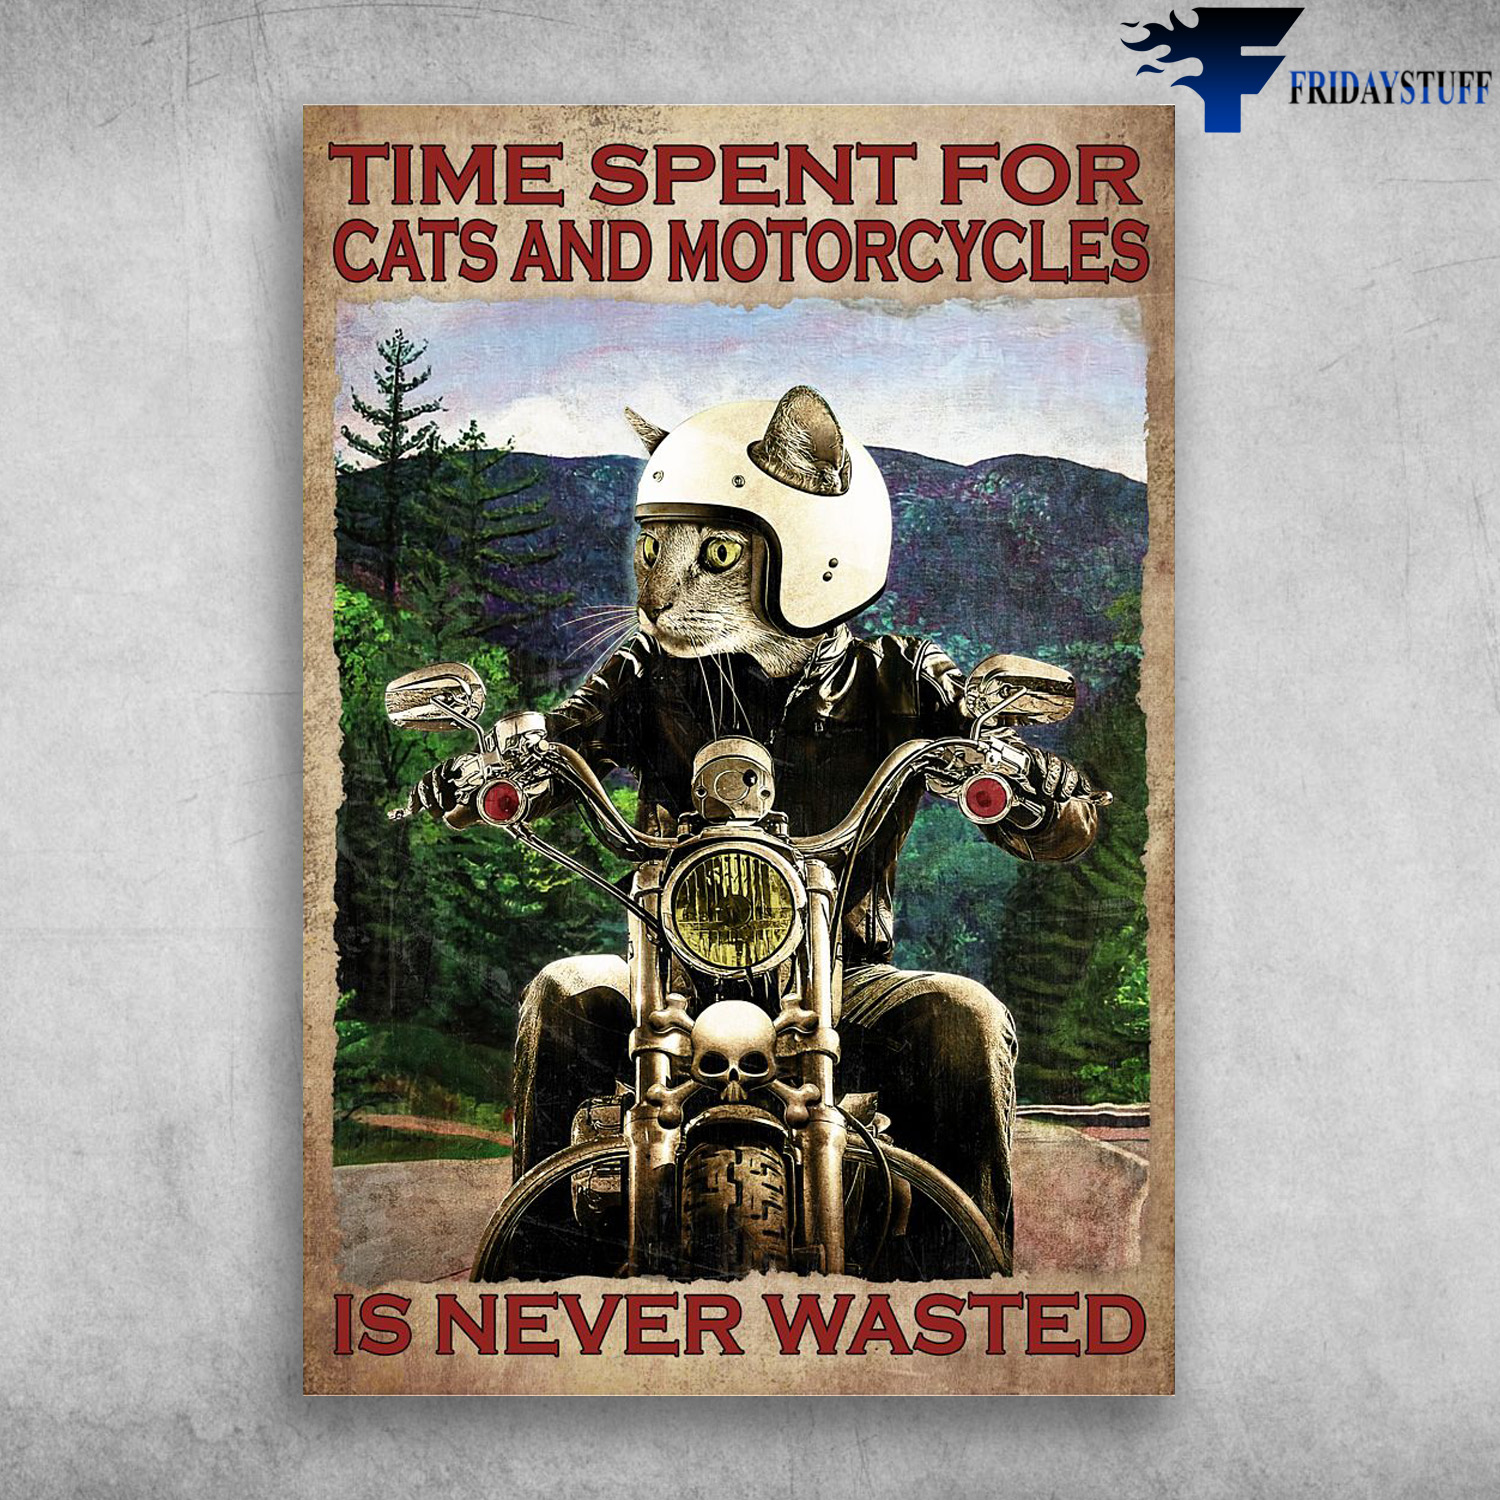 Cat Motorcycle - Time Spent For Cats And Motorcycles, Is Never Wasted